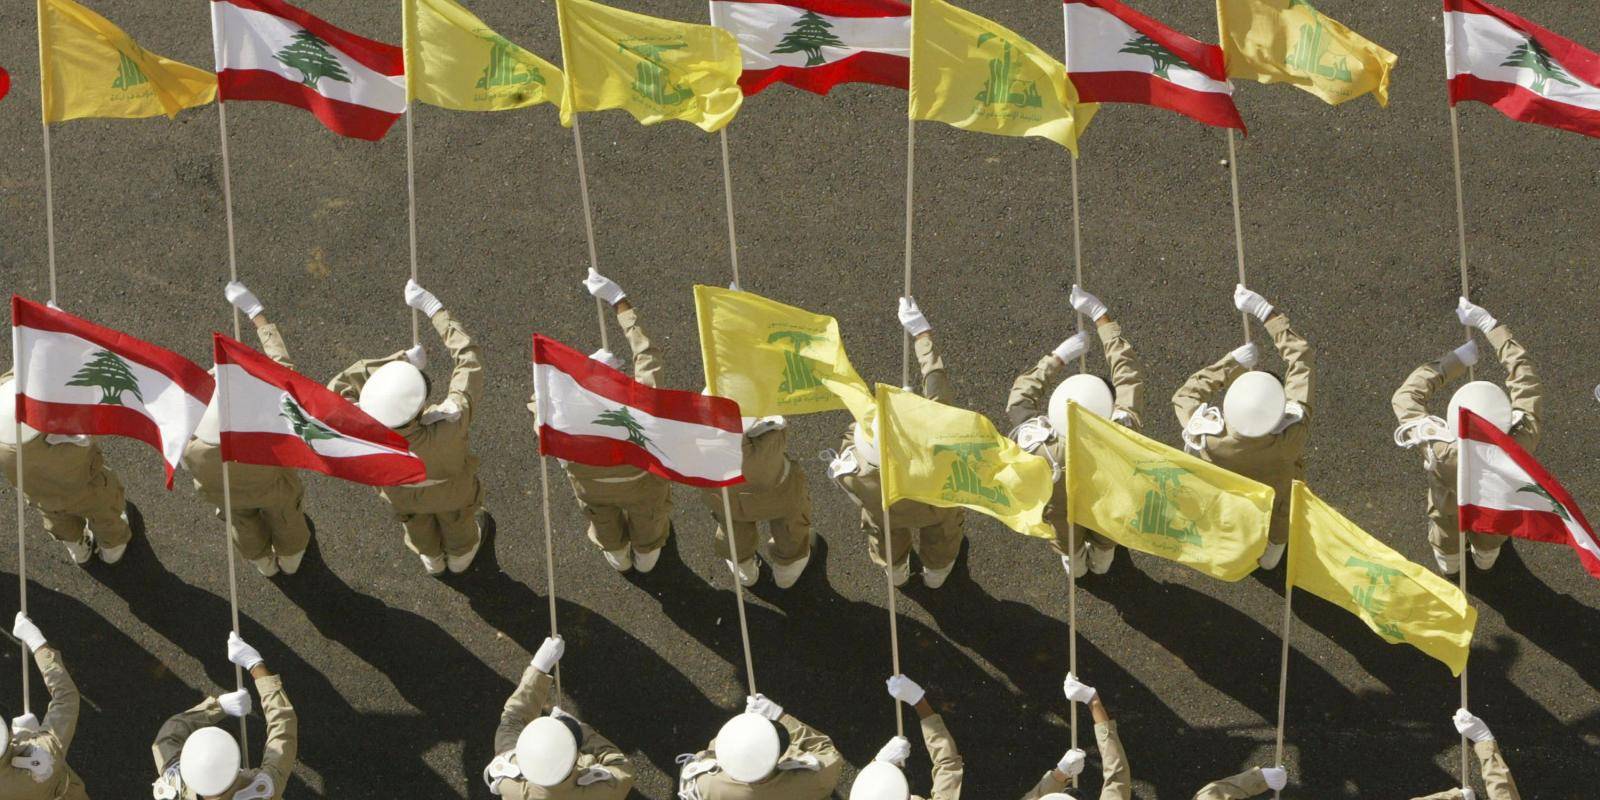 Hezbollah members in uniform form an honour guard holding Lebanese and Hezbollah flags in Beirut